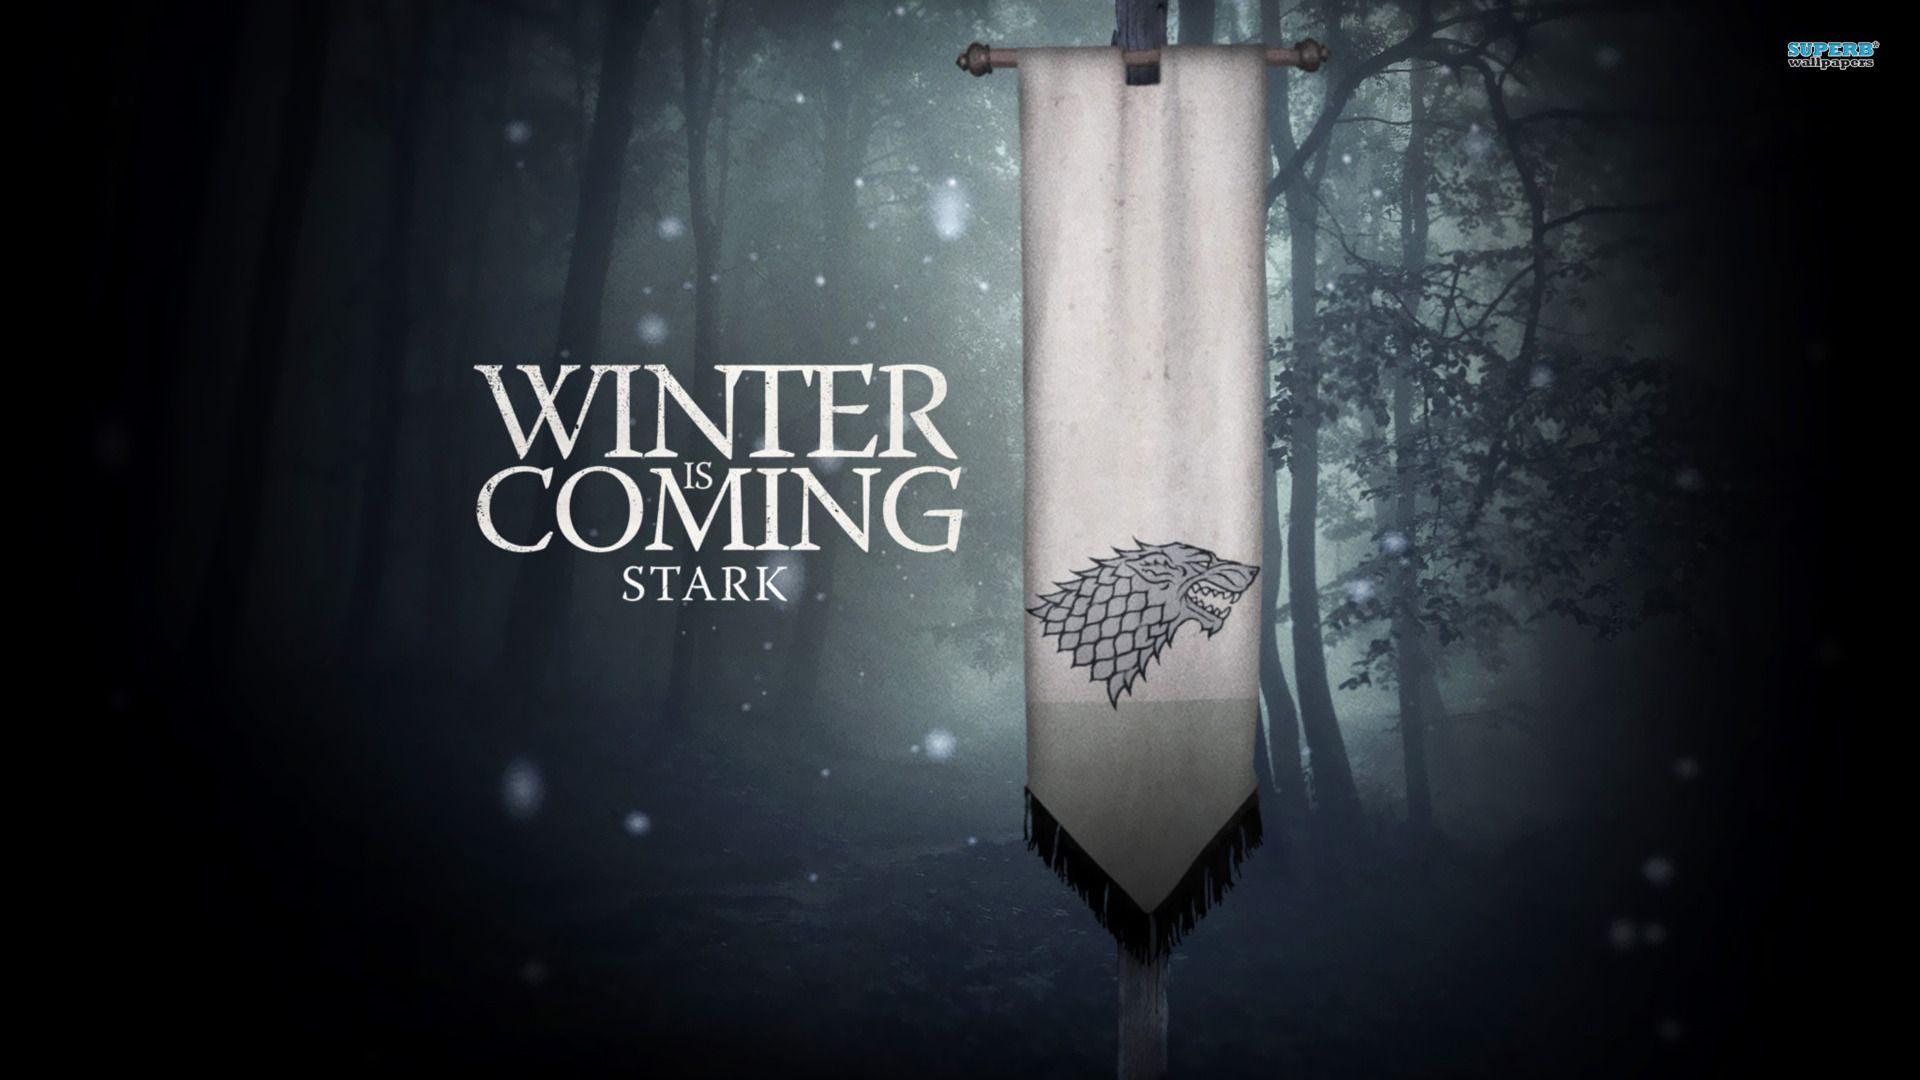 Winter Is Coming wallpaper 1920x1200 px - Winter Is